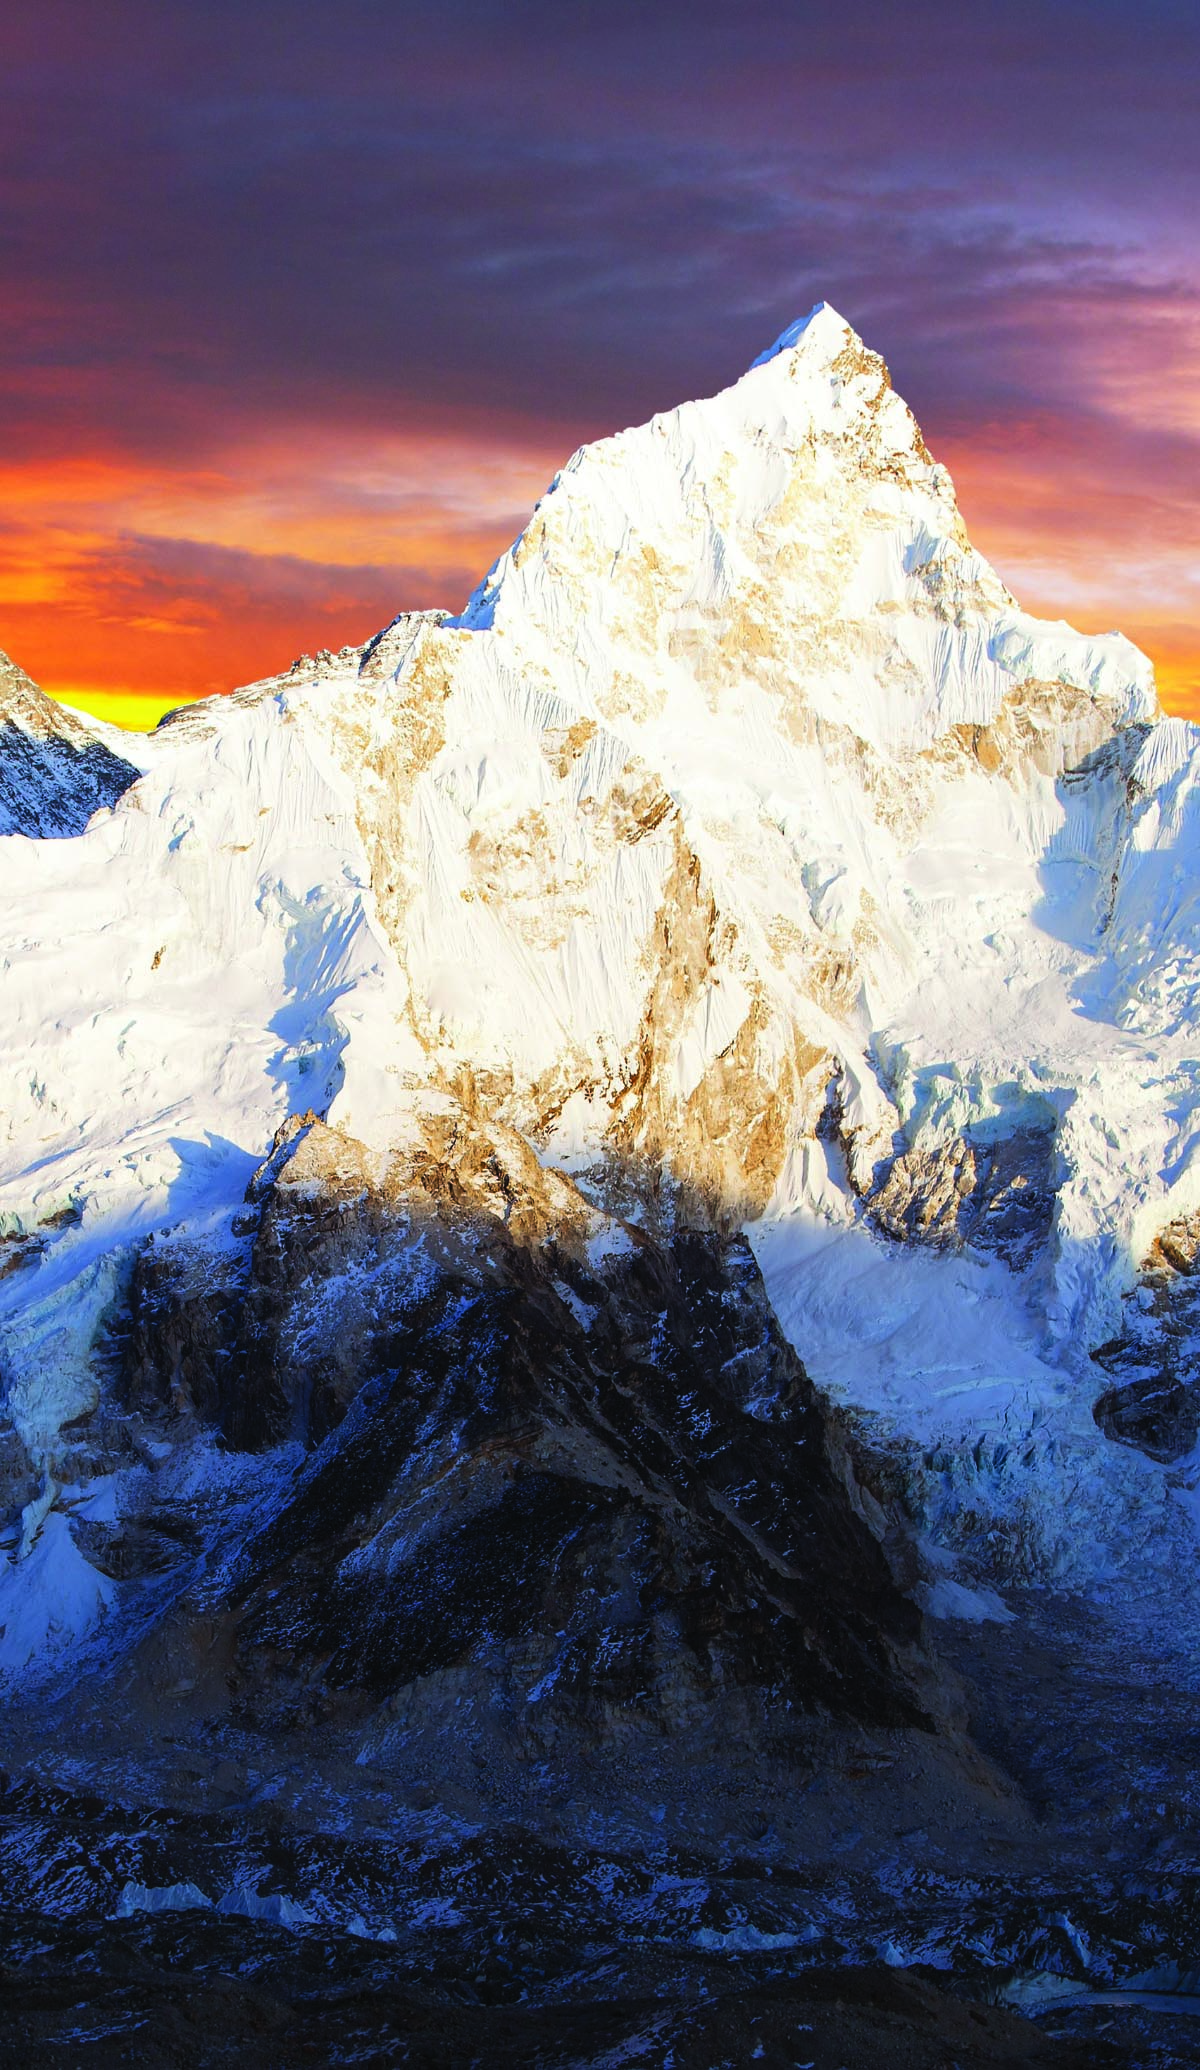 Mount Everest sunset panoramic view